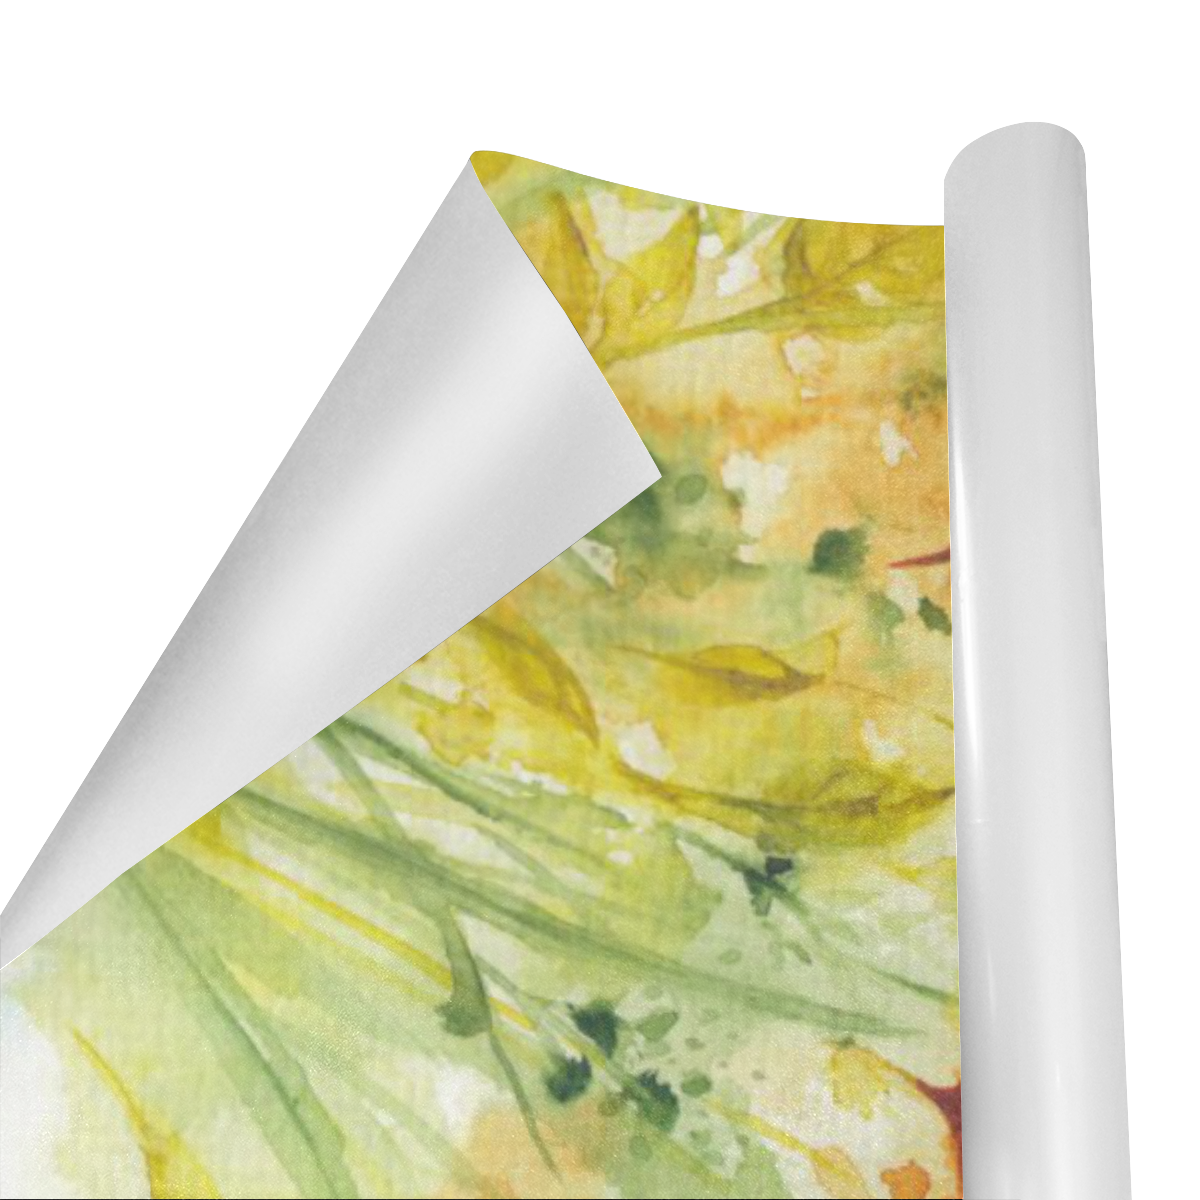 Yellow Wild Flowers Watercolors - floral Gift Wrapping Paper 58"x 23" (5 Rolls)